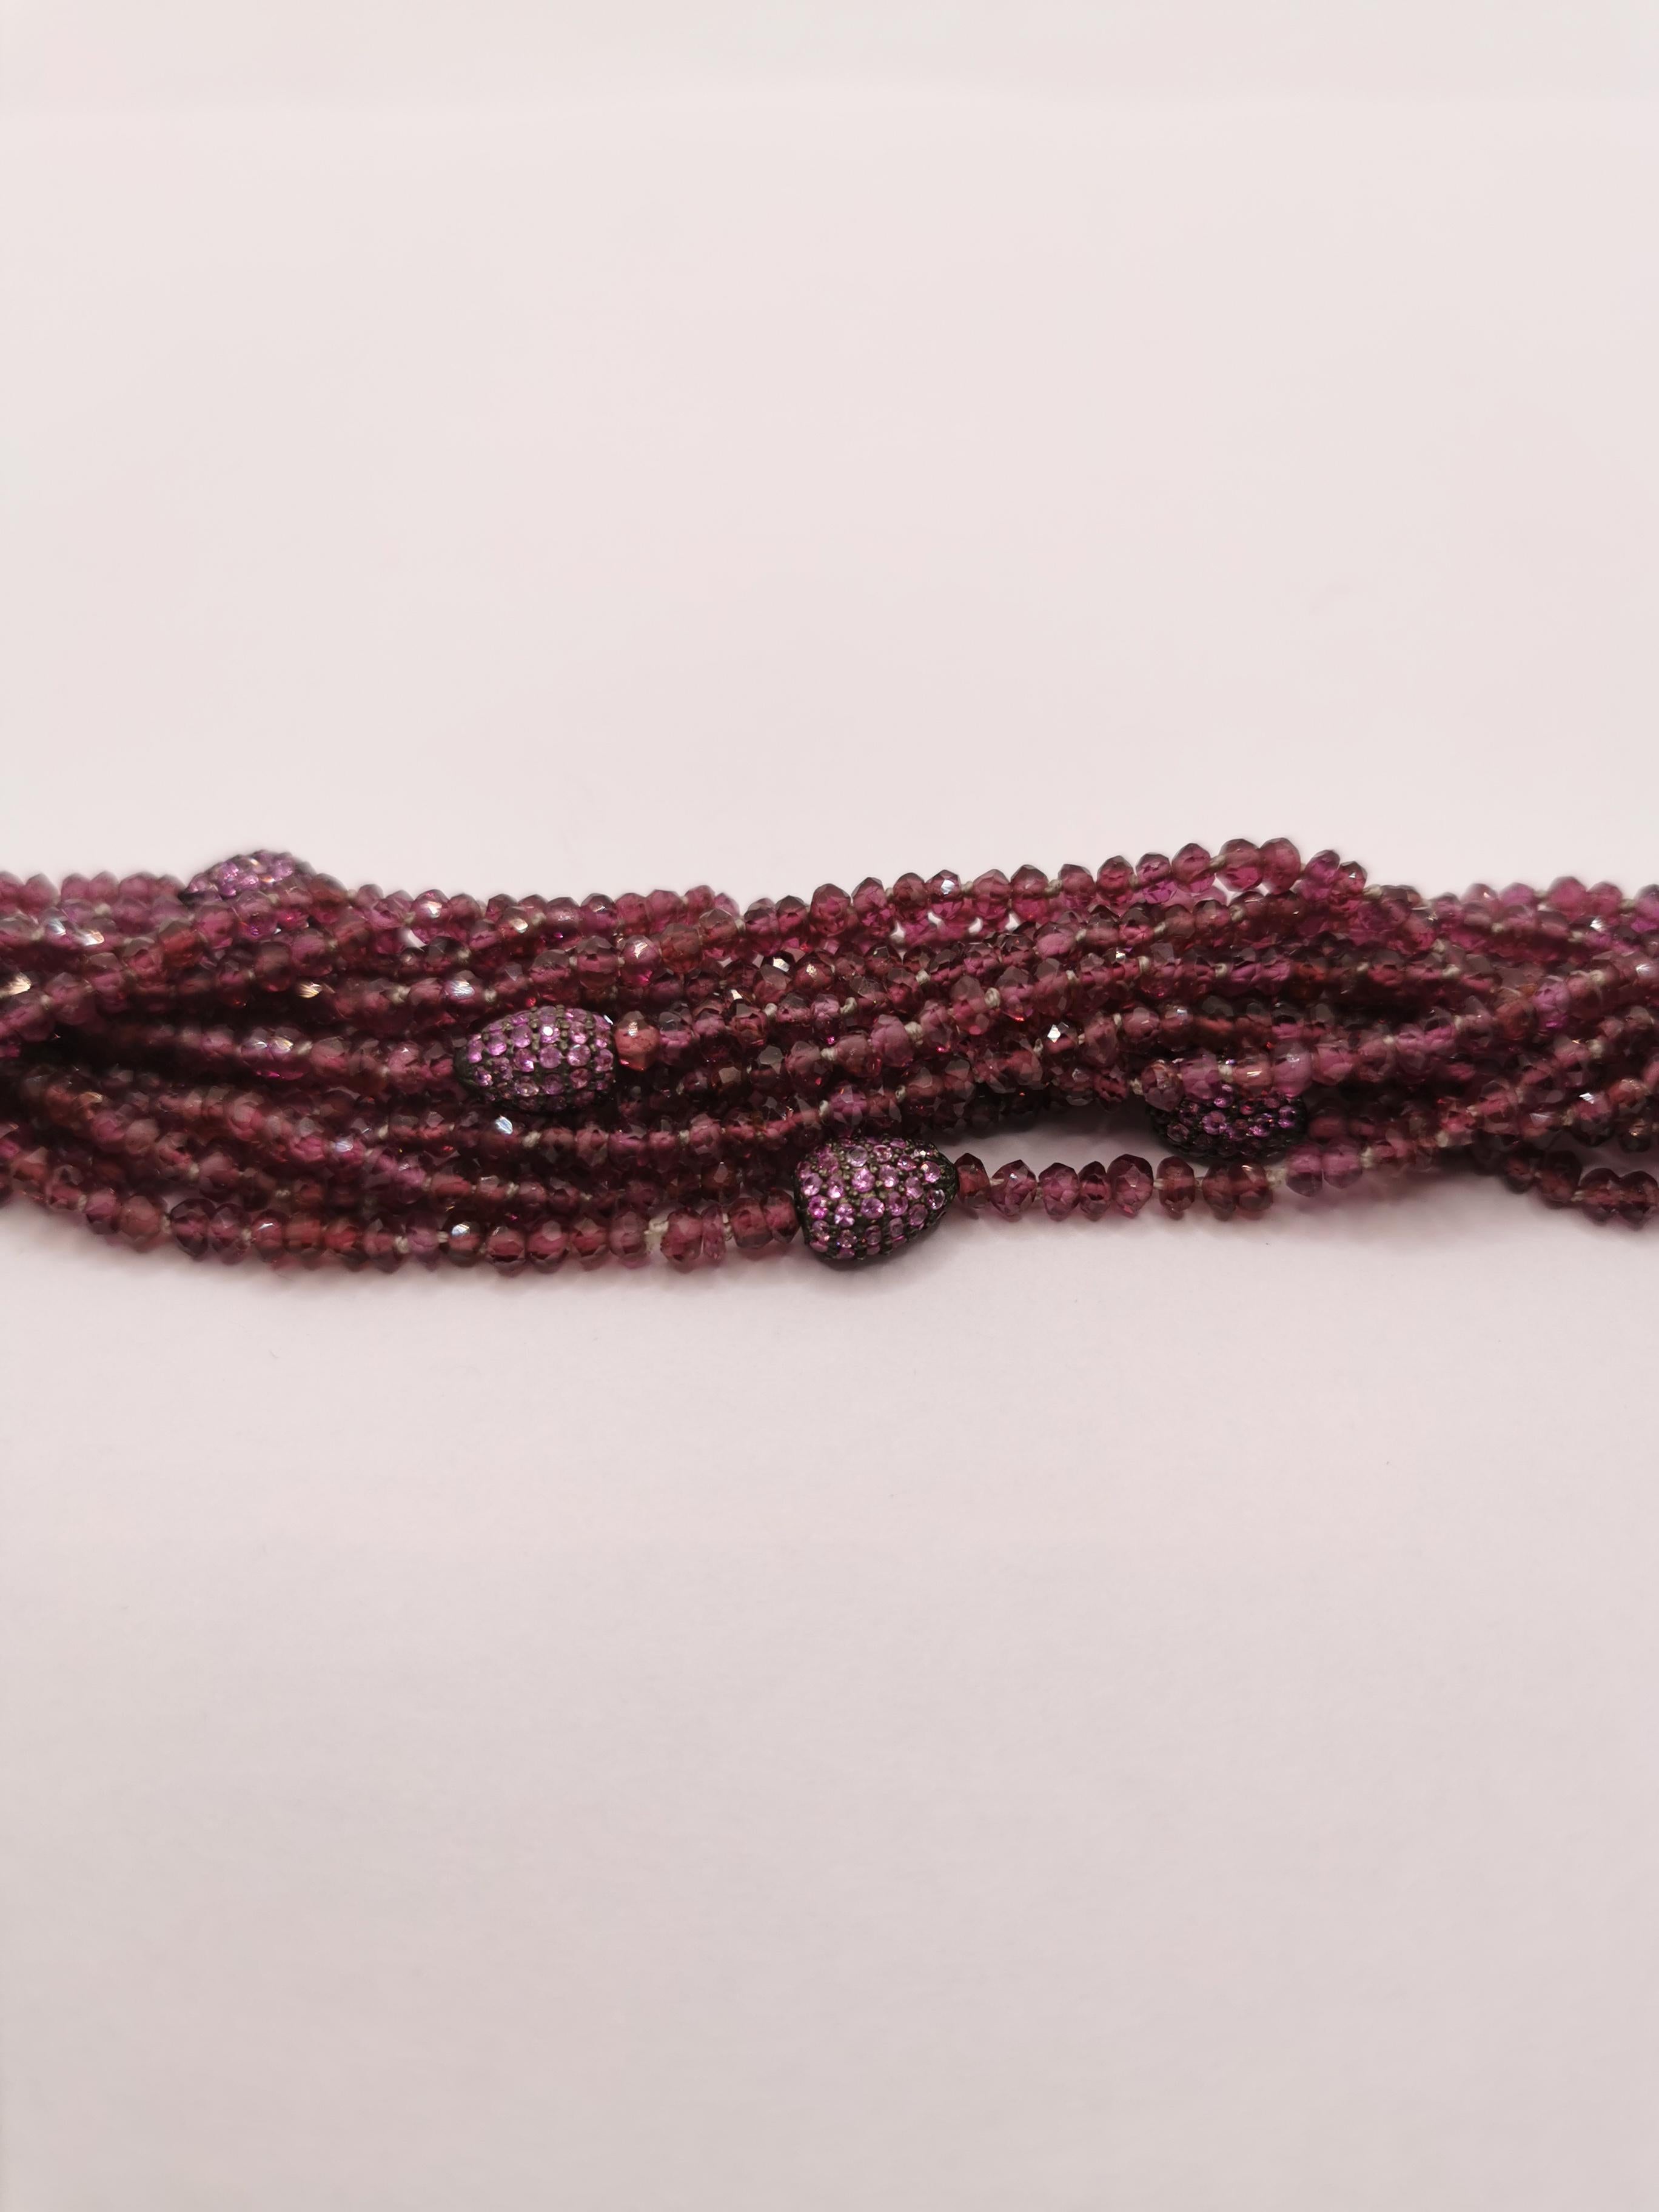 Rhodolite Garnet and Pink Sapphires Multi Strand Bakelite Bead Bracelet In New Condition For Sale In Cattolica, IT